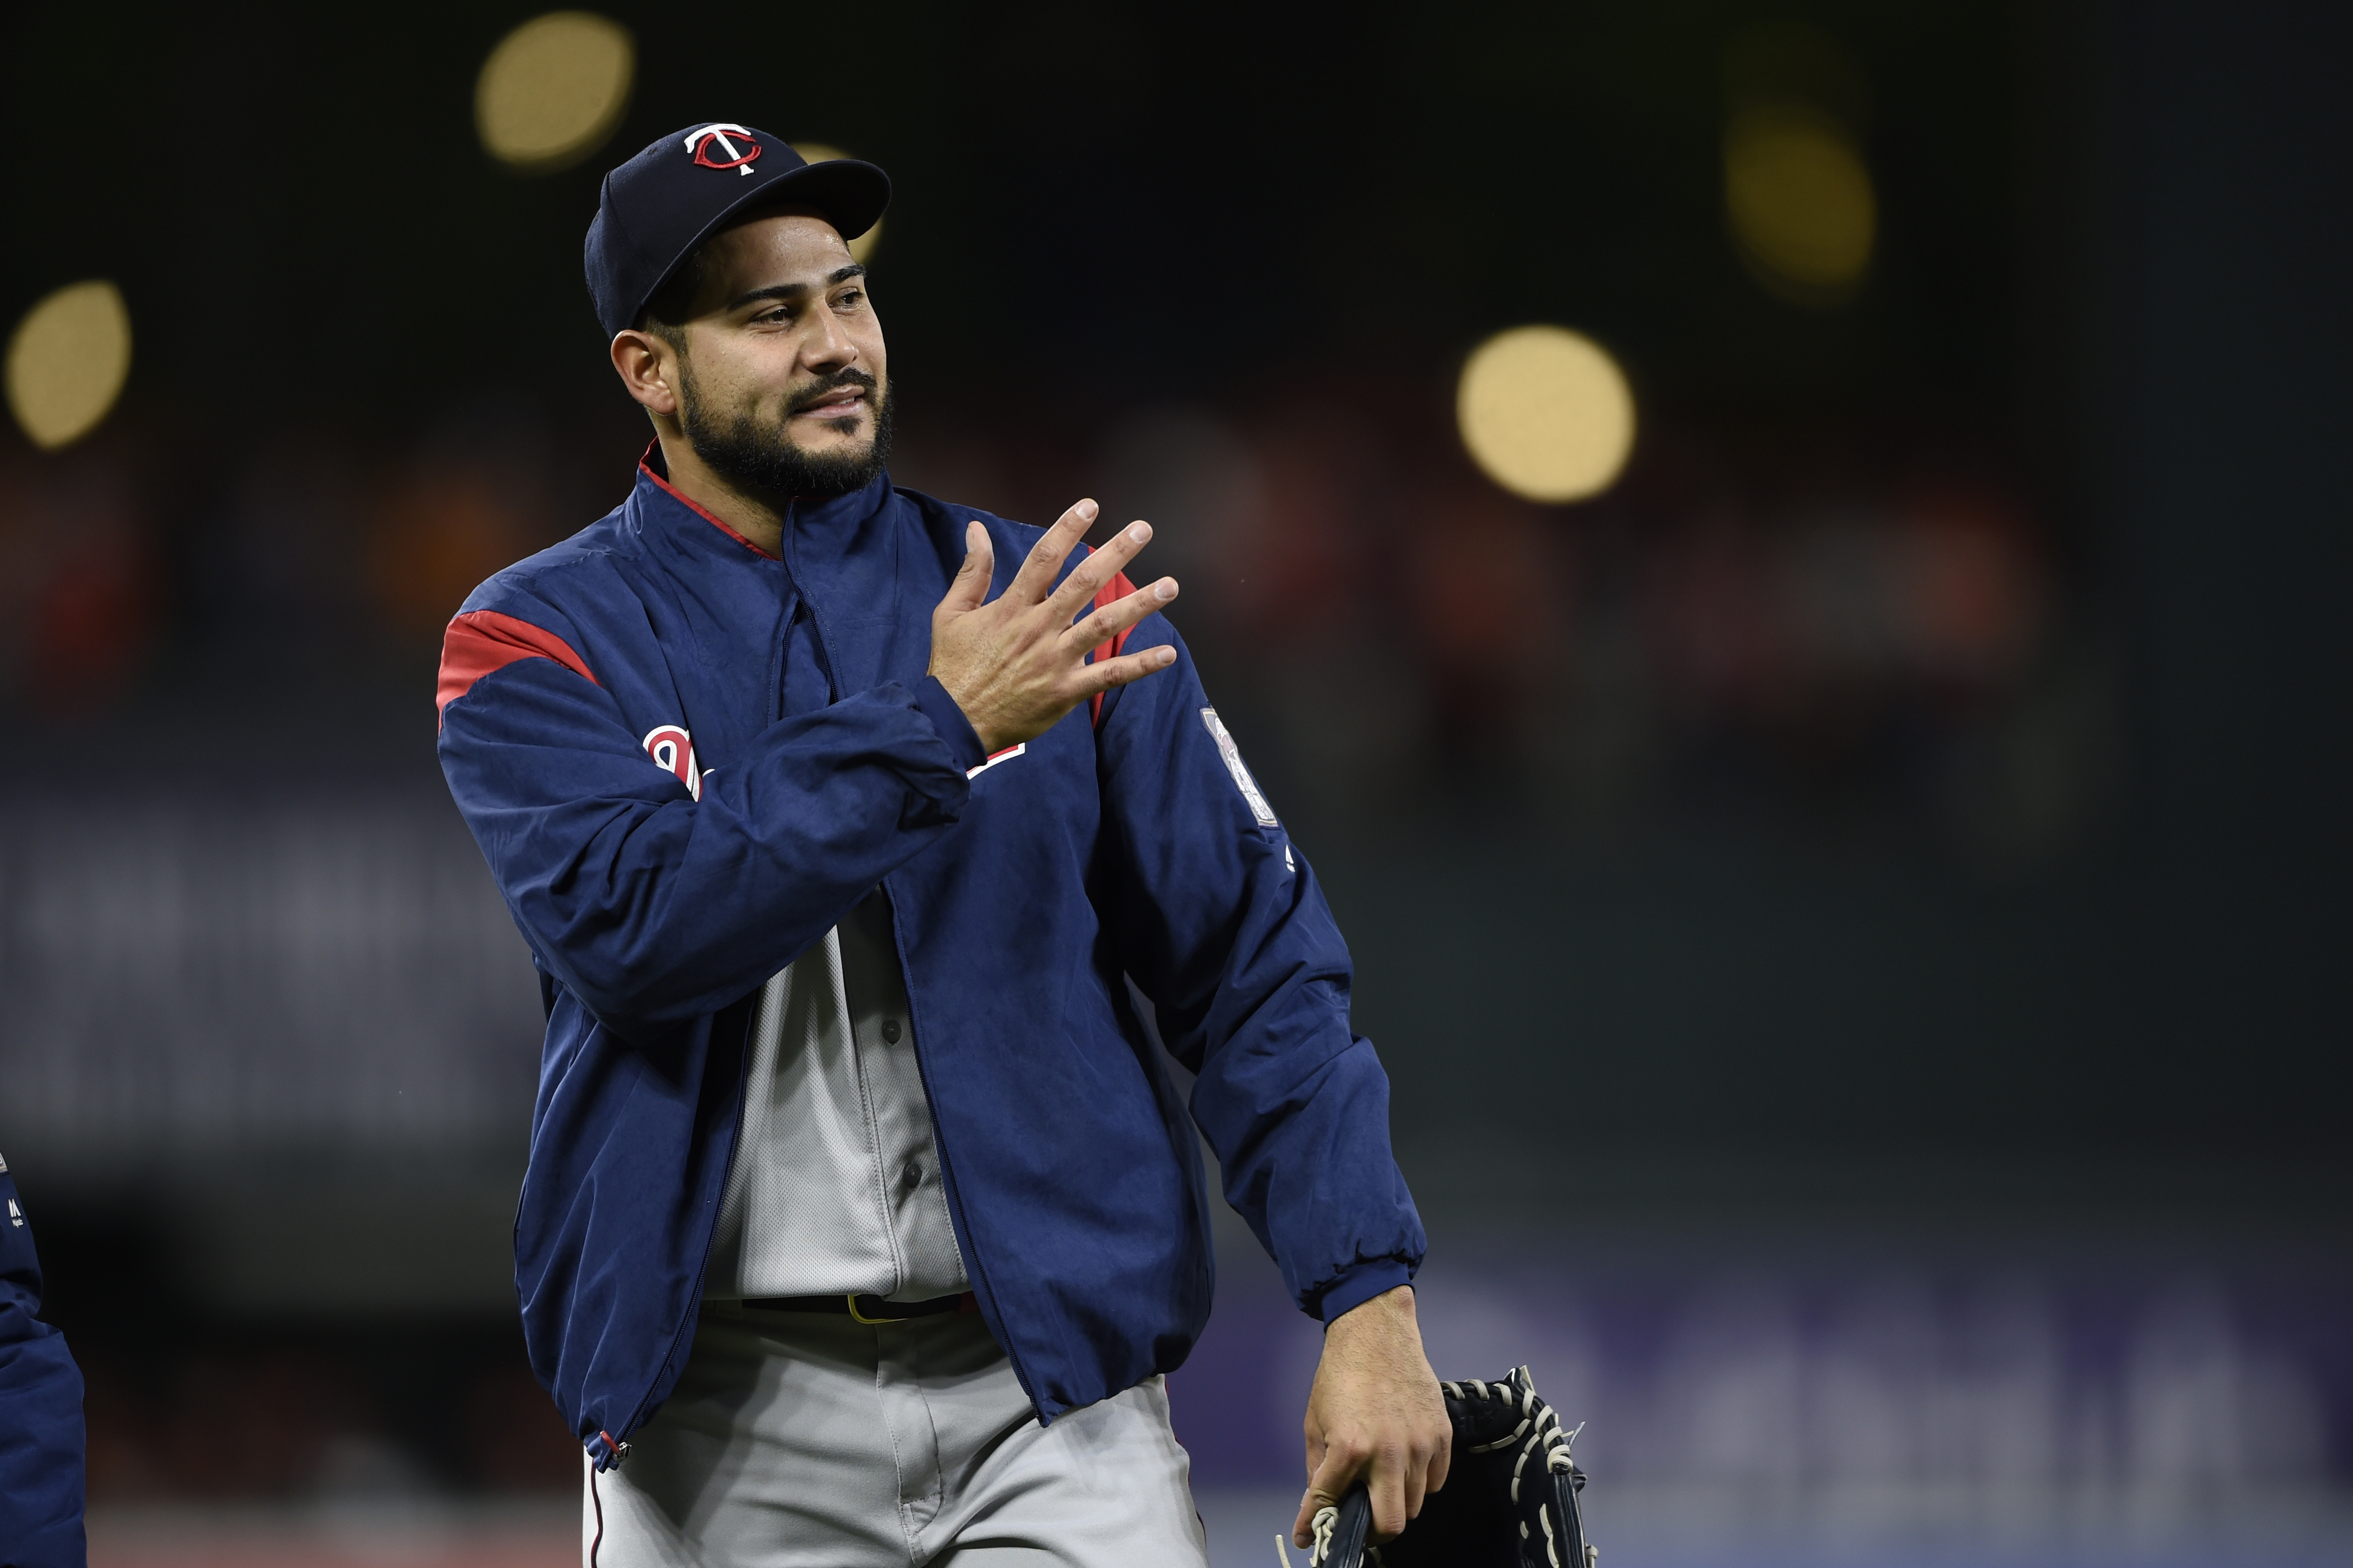 Twins lefthander Martin Perez says he couldn't believe he gave up Hanser Alberto's first career home run Saturday, because they're close friends from their days with the Rangers.